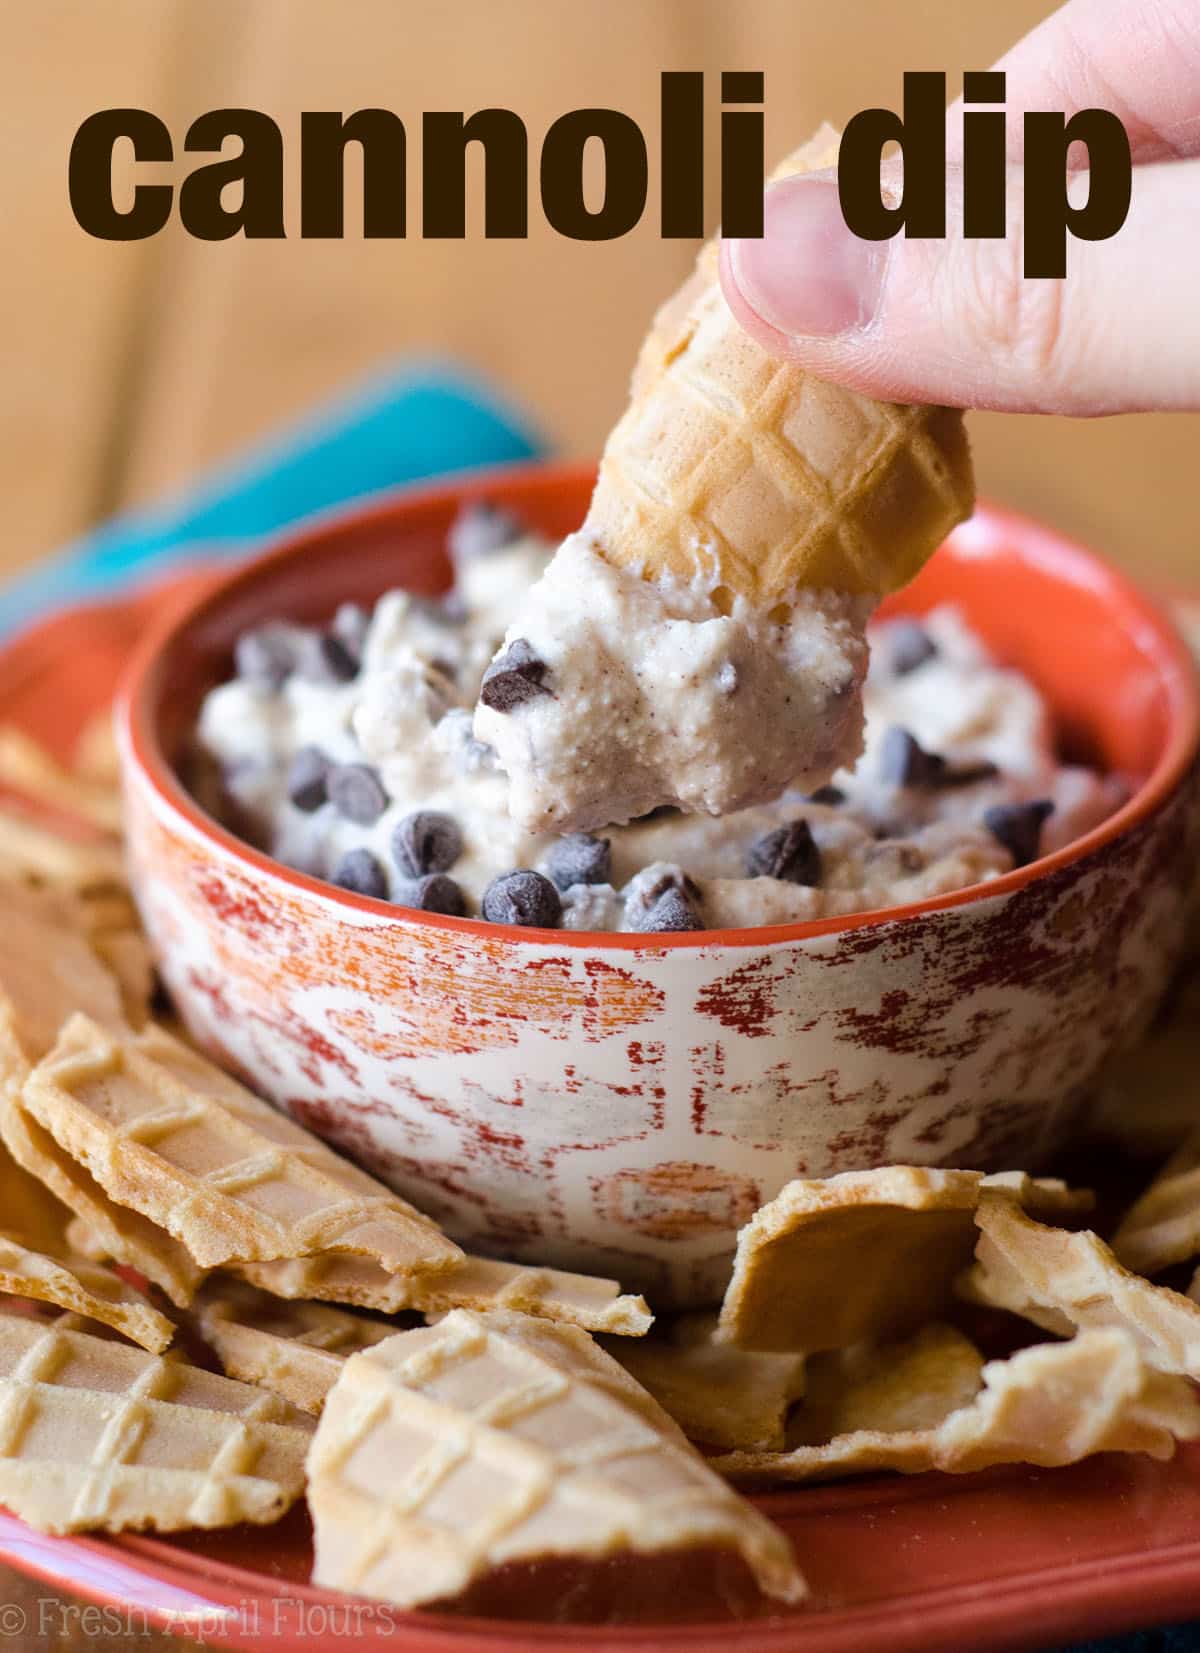 Cannoli Dip: All the taste you love from a cannoli without all the hard work of filling shells. Serve with broken waffle cone pieces for a deconstructed treat. via @frshaprilflours